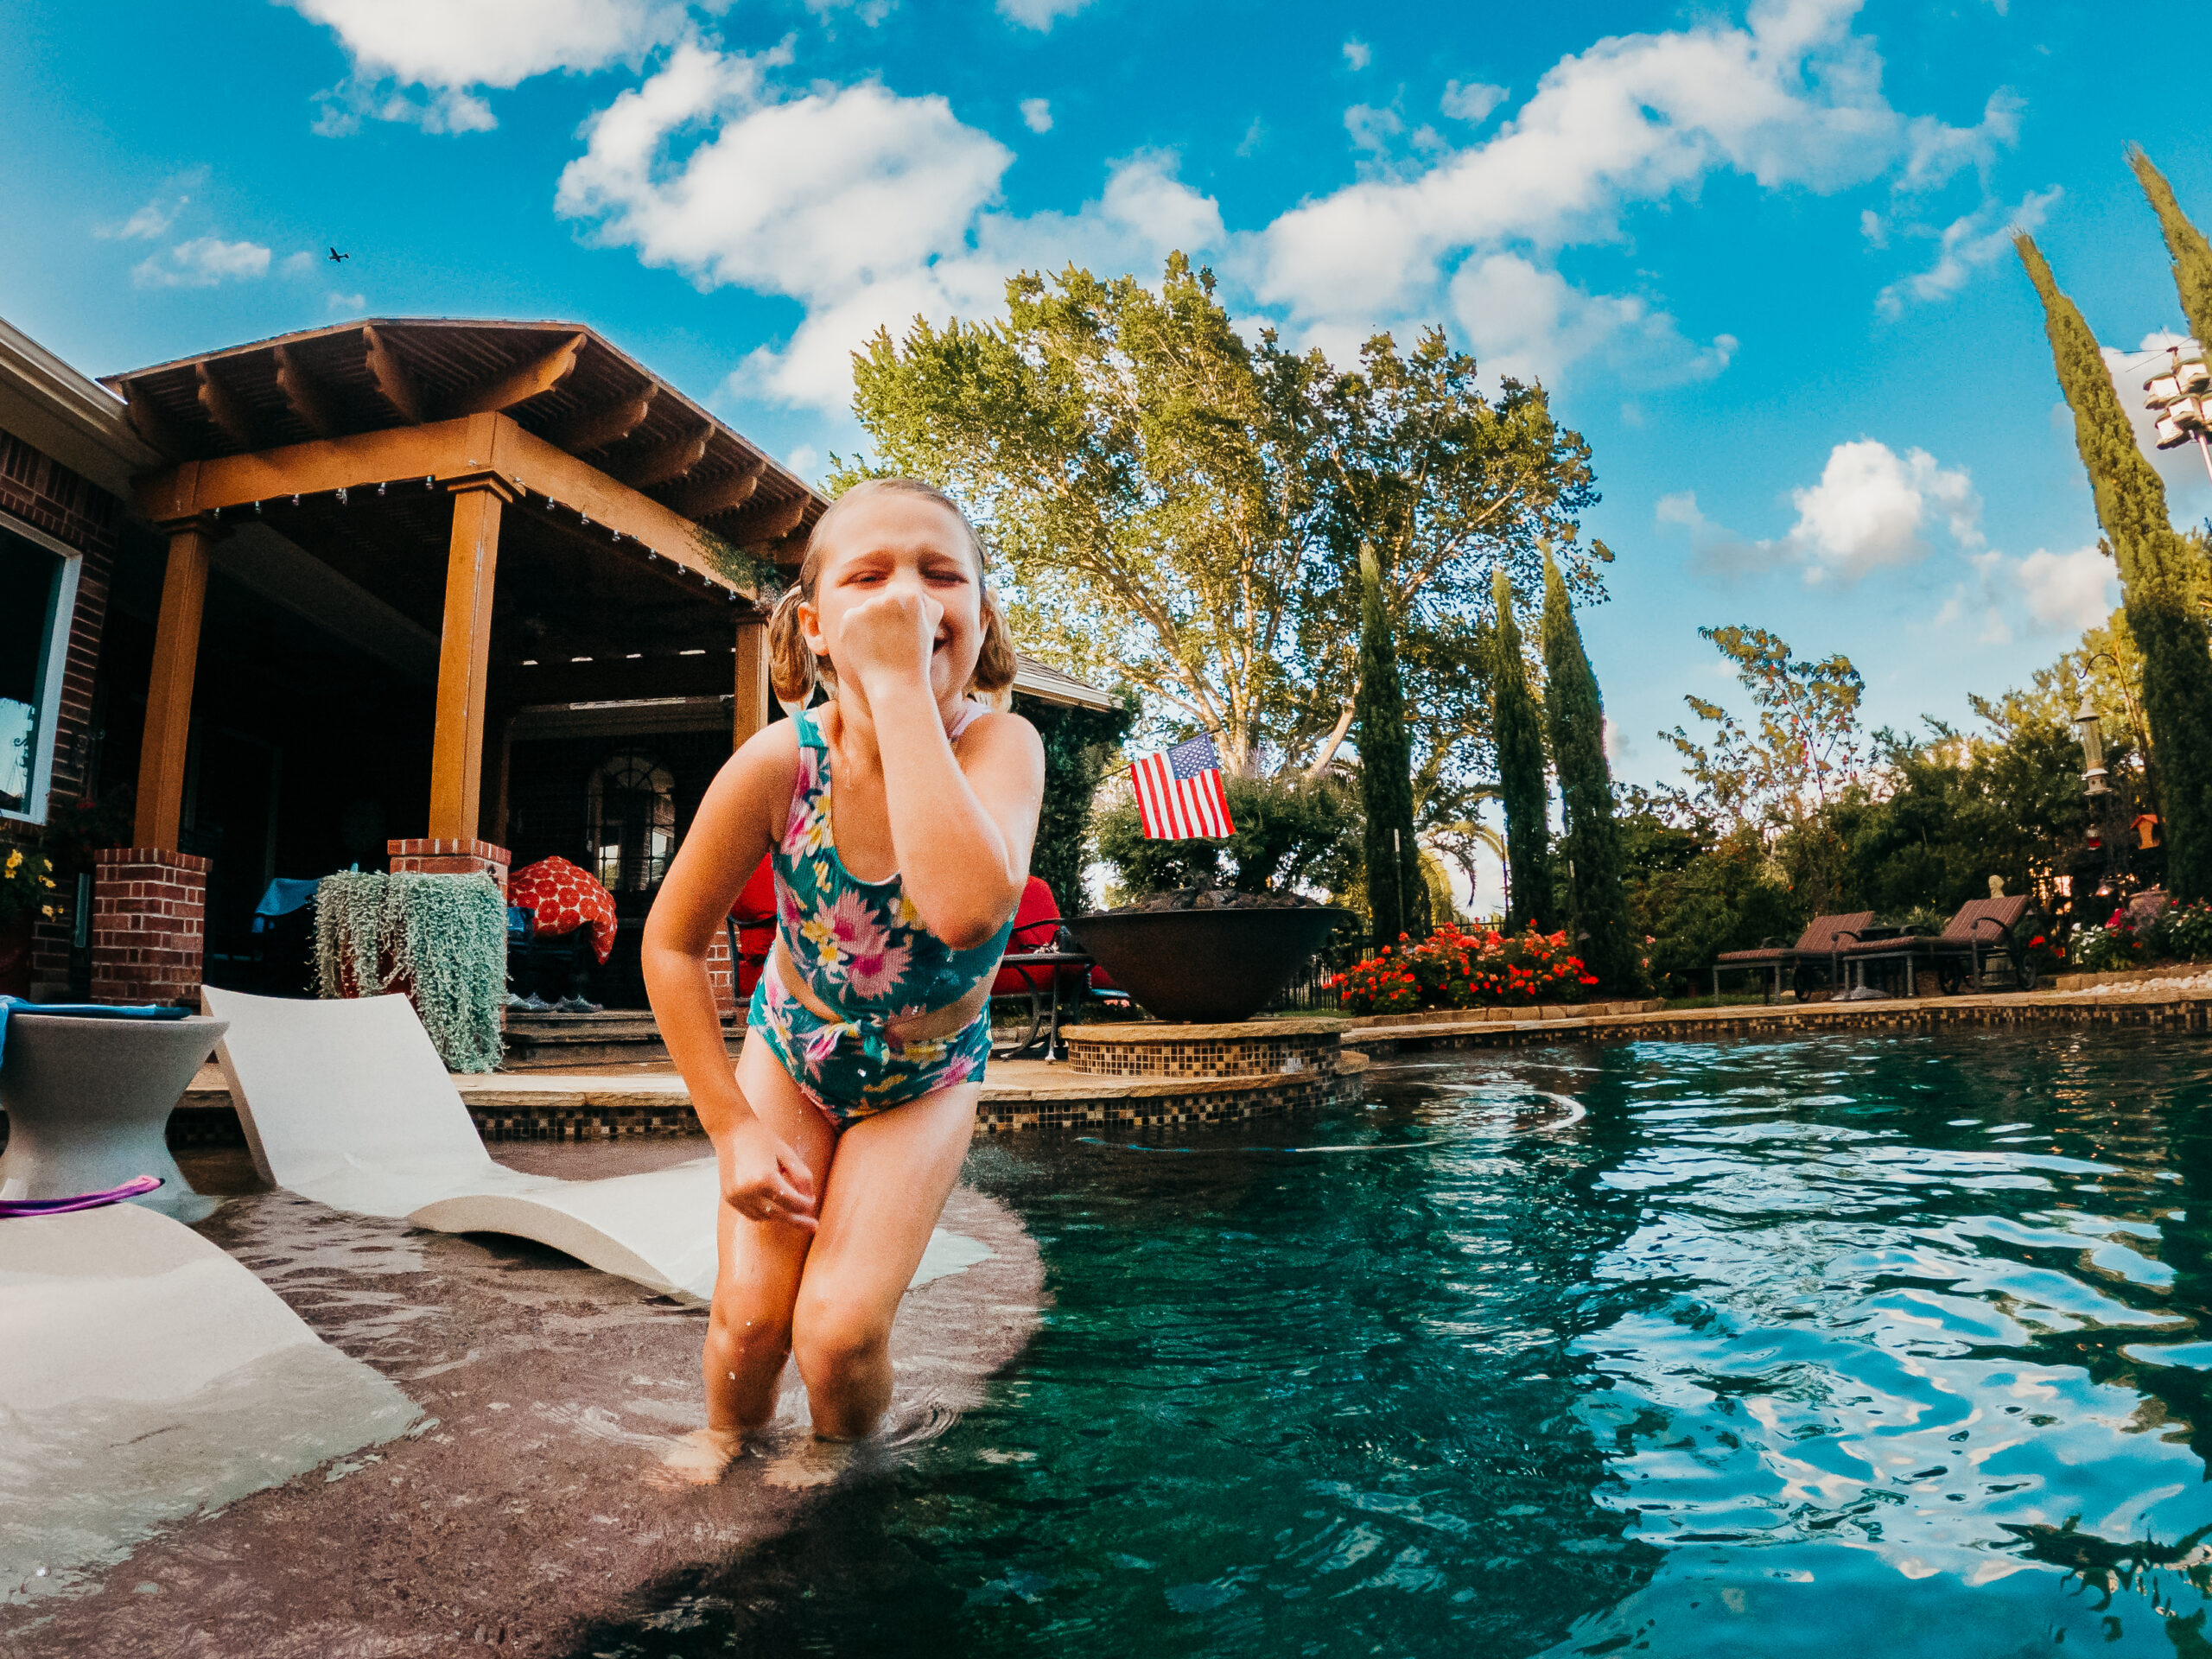 Child jumping into the pool during summer!